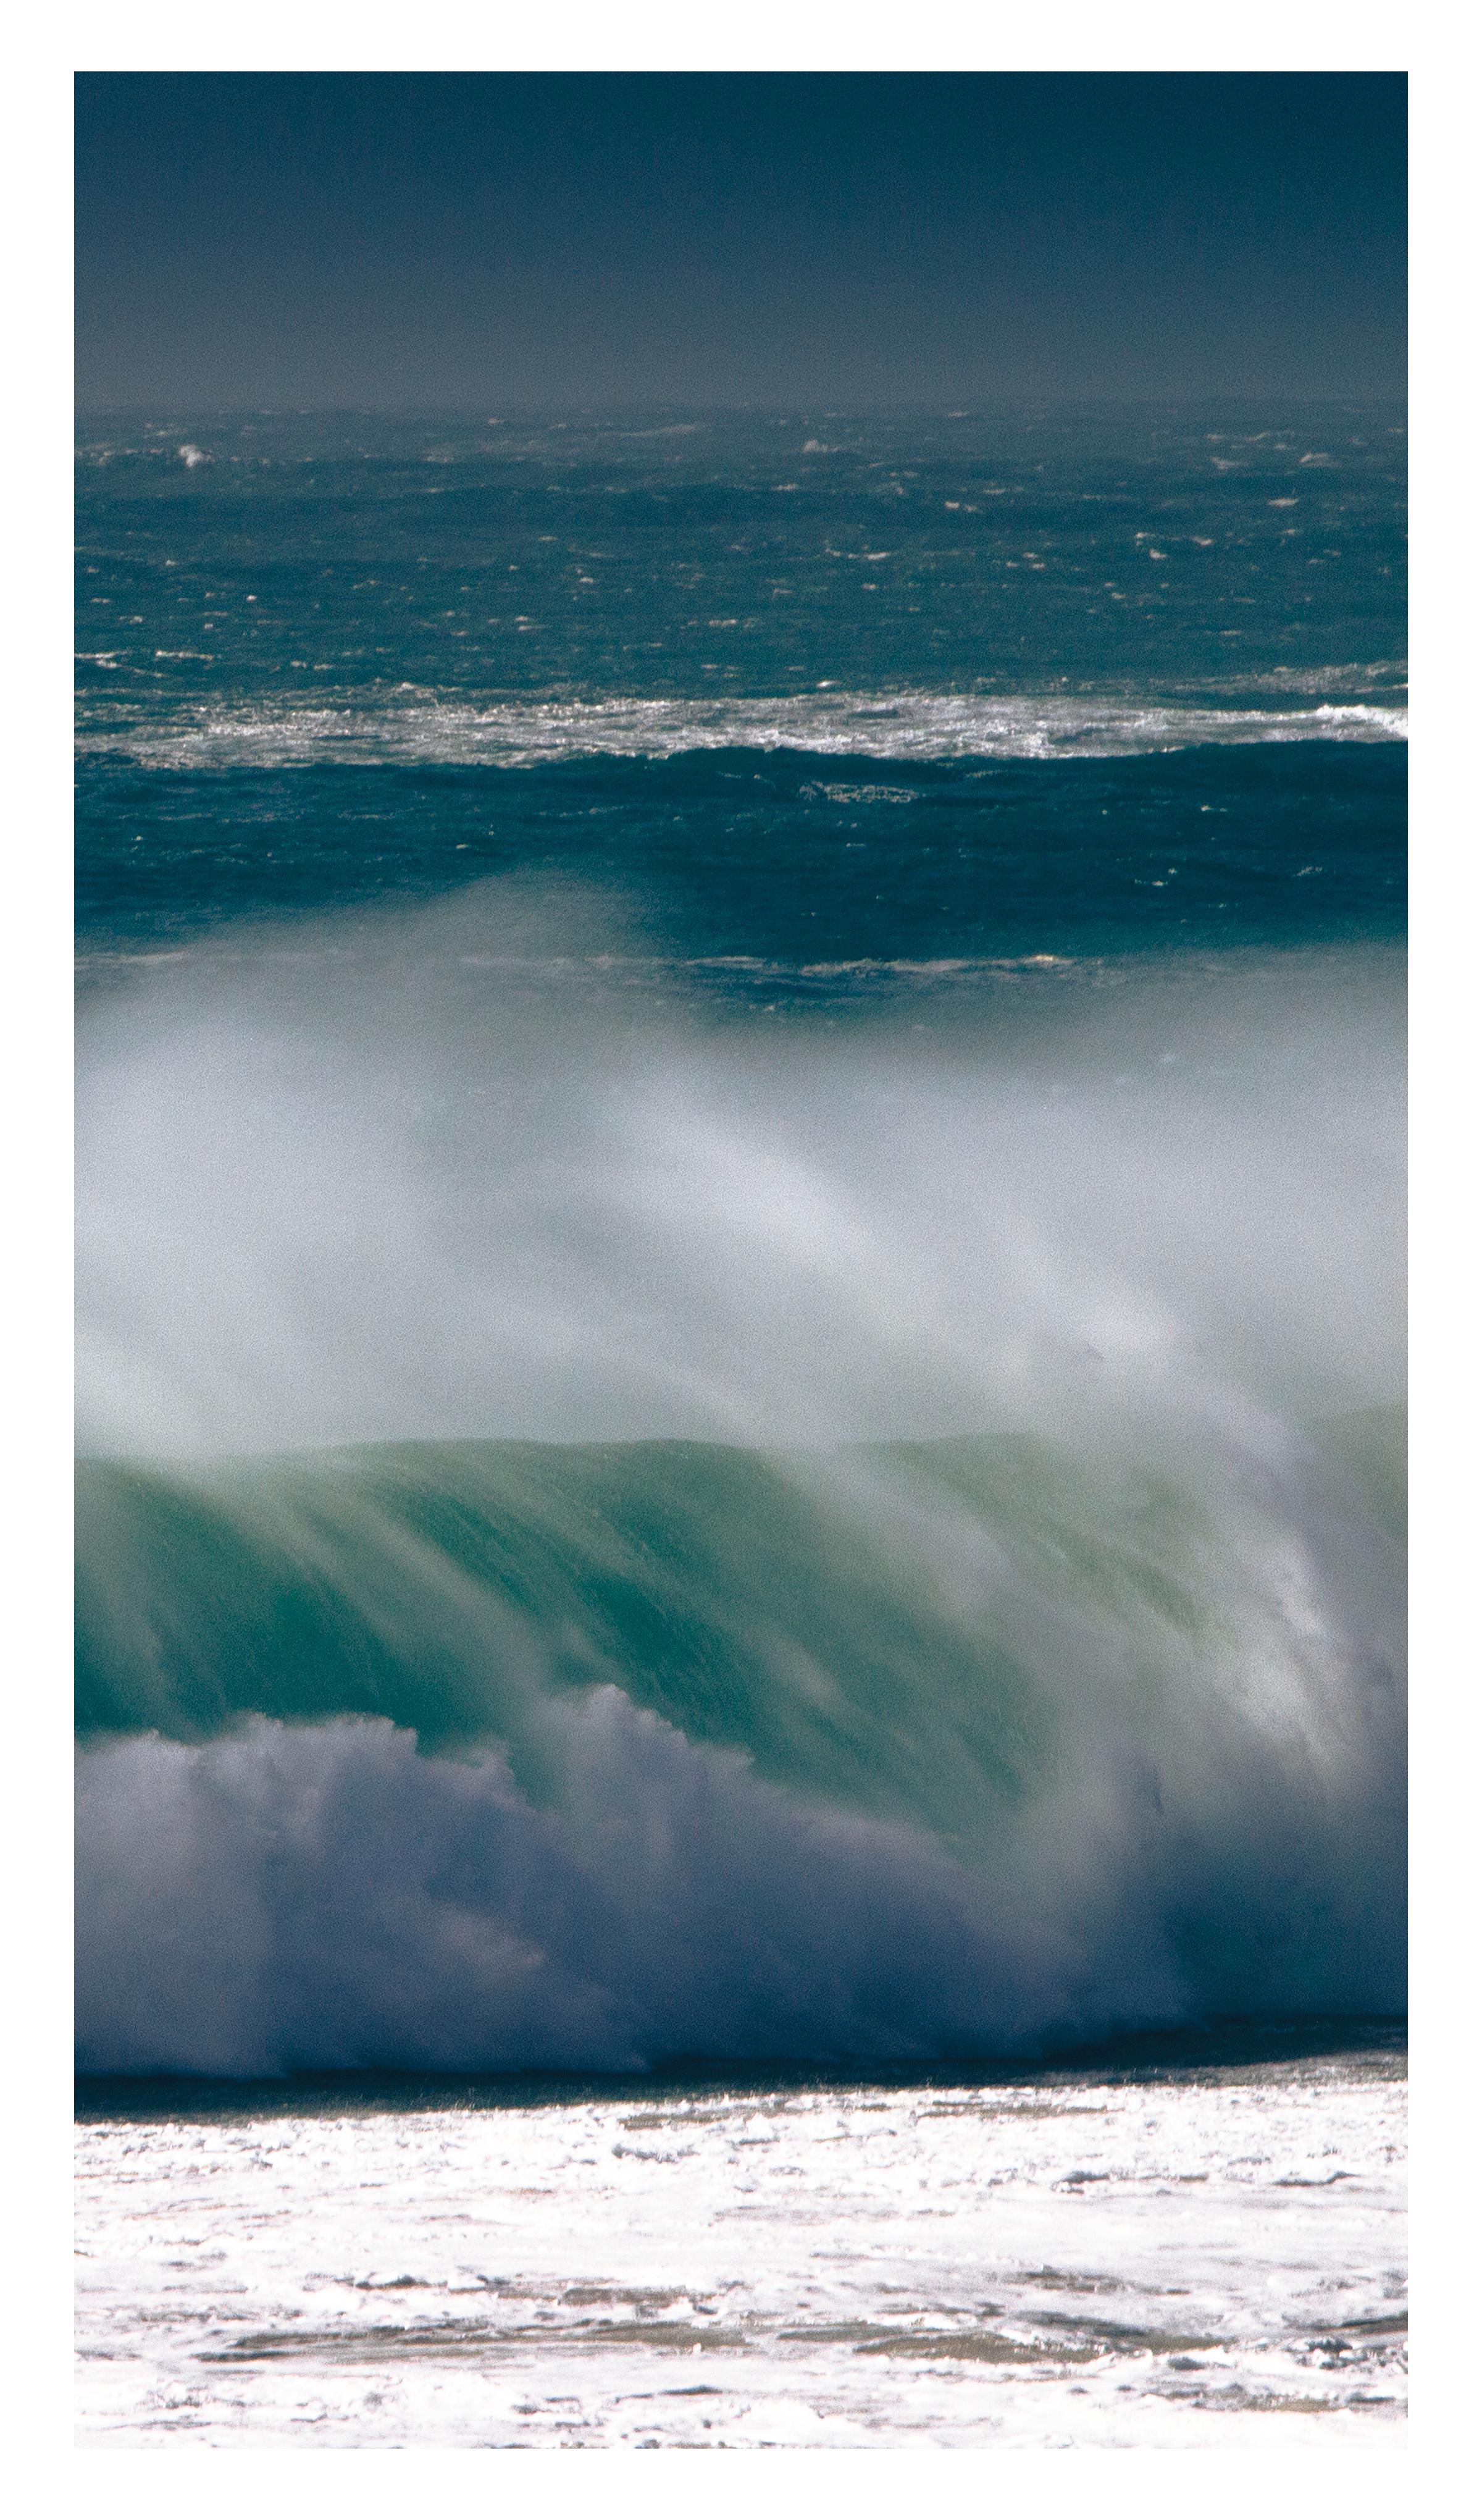 'Pounding Heart' 
Archival photographic triptych. Limited Edition of 25. Unframed.
_________________
The wild Atlantic explodes in a raw release of energy, the graceful formation of the great waves a counterbalance to the thunder and beat of the